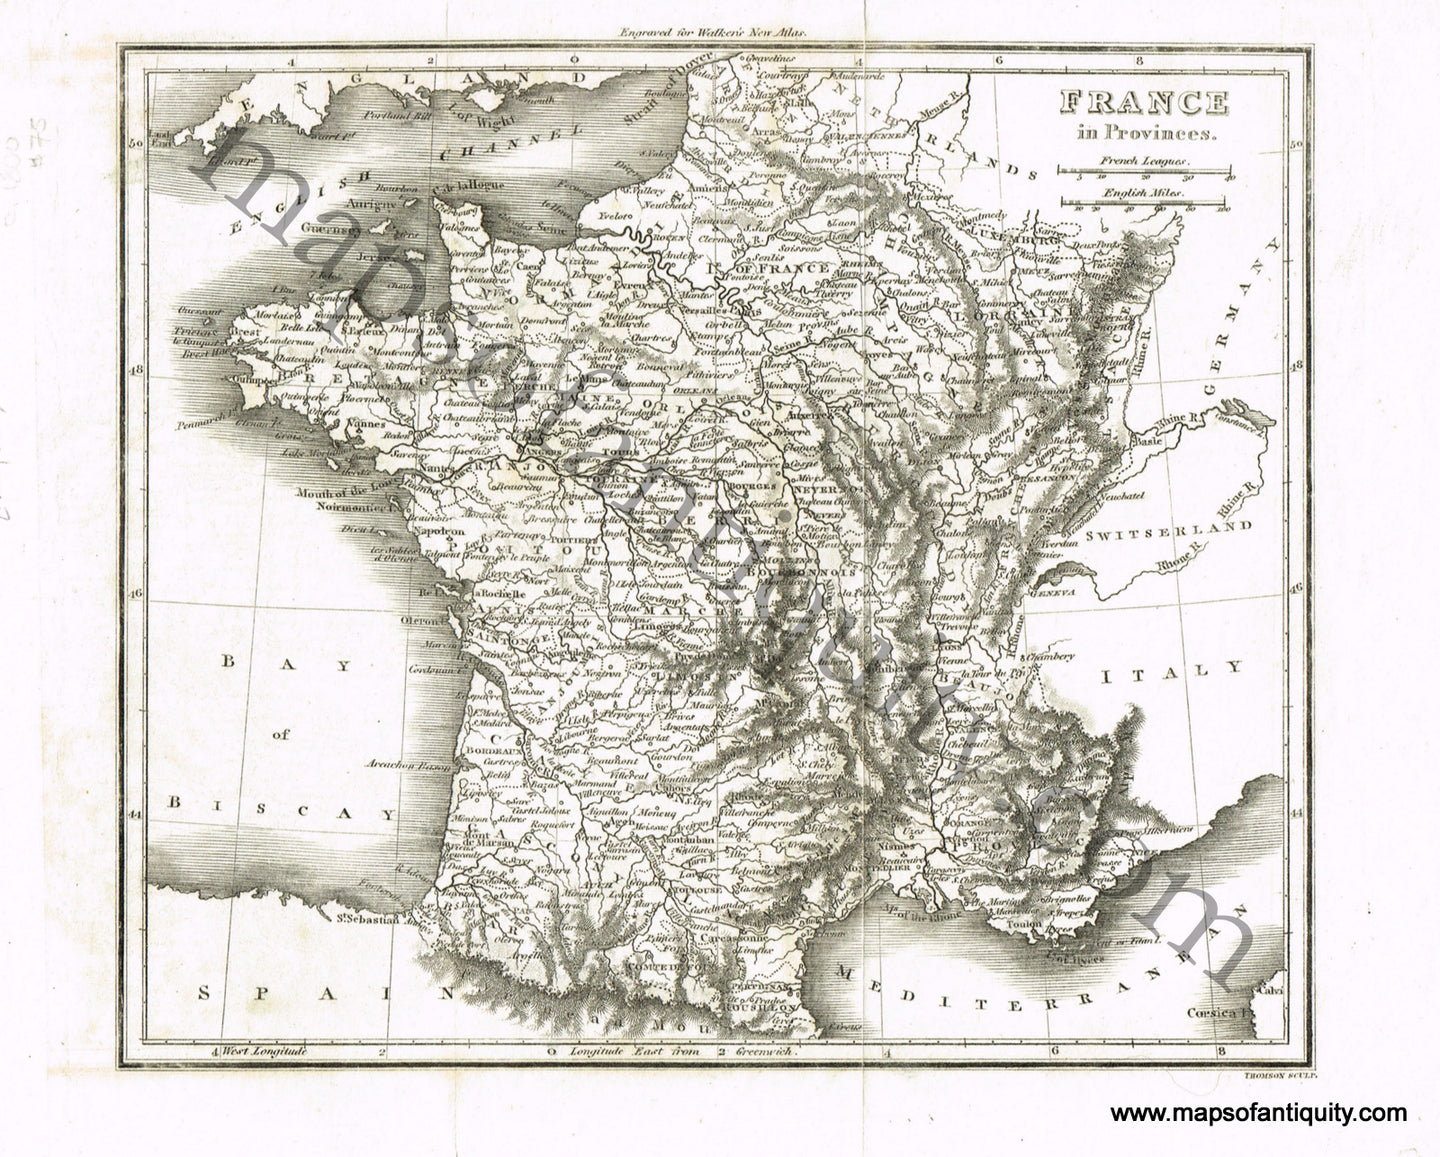 Black-and-White-Engraved-Antique-Map-France.-France--1800-Walker-Maps-Of-Antiquity